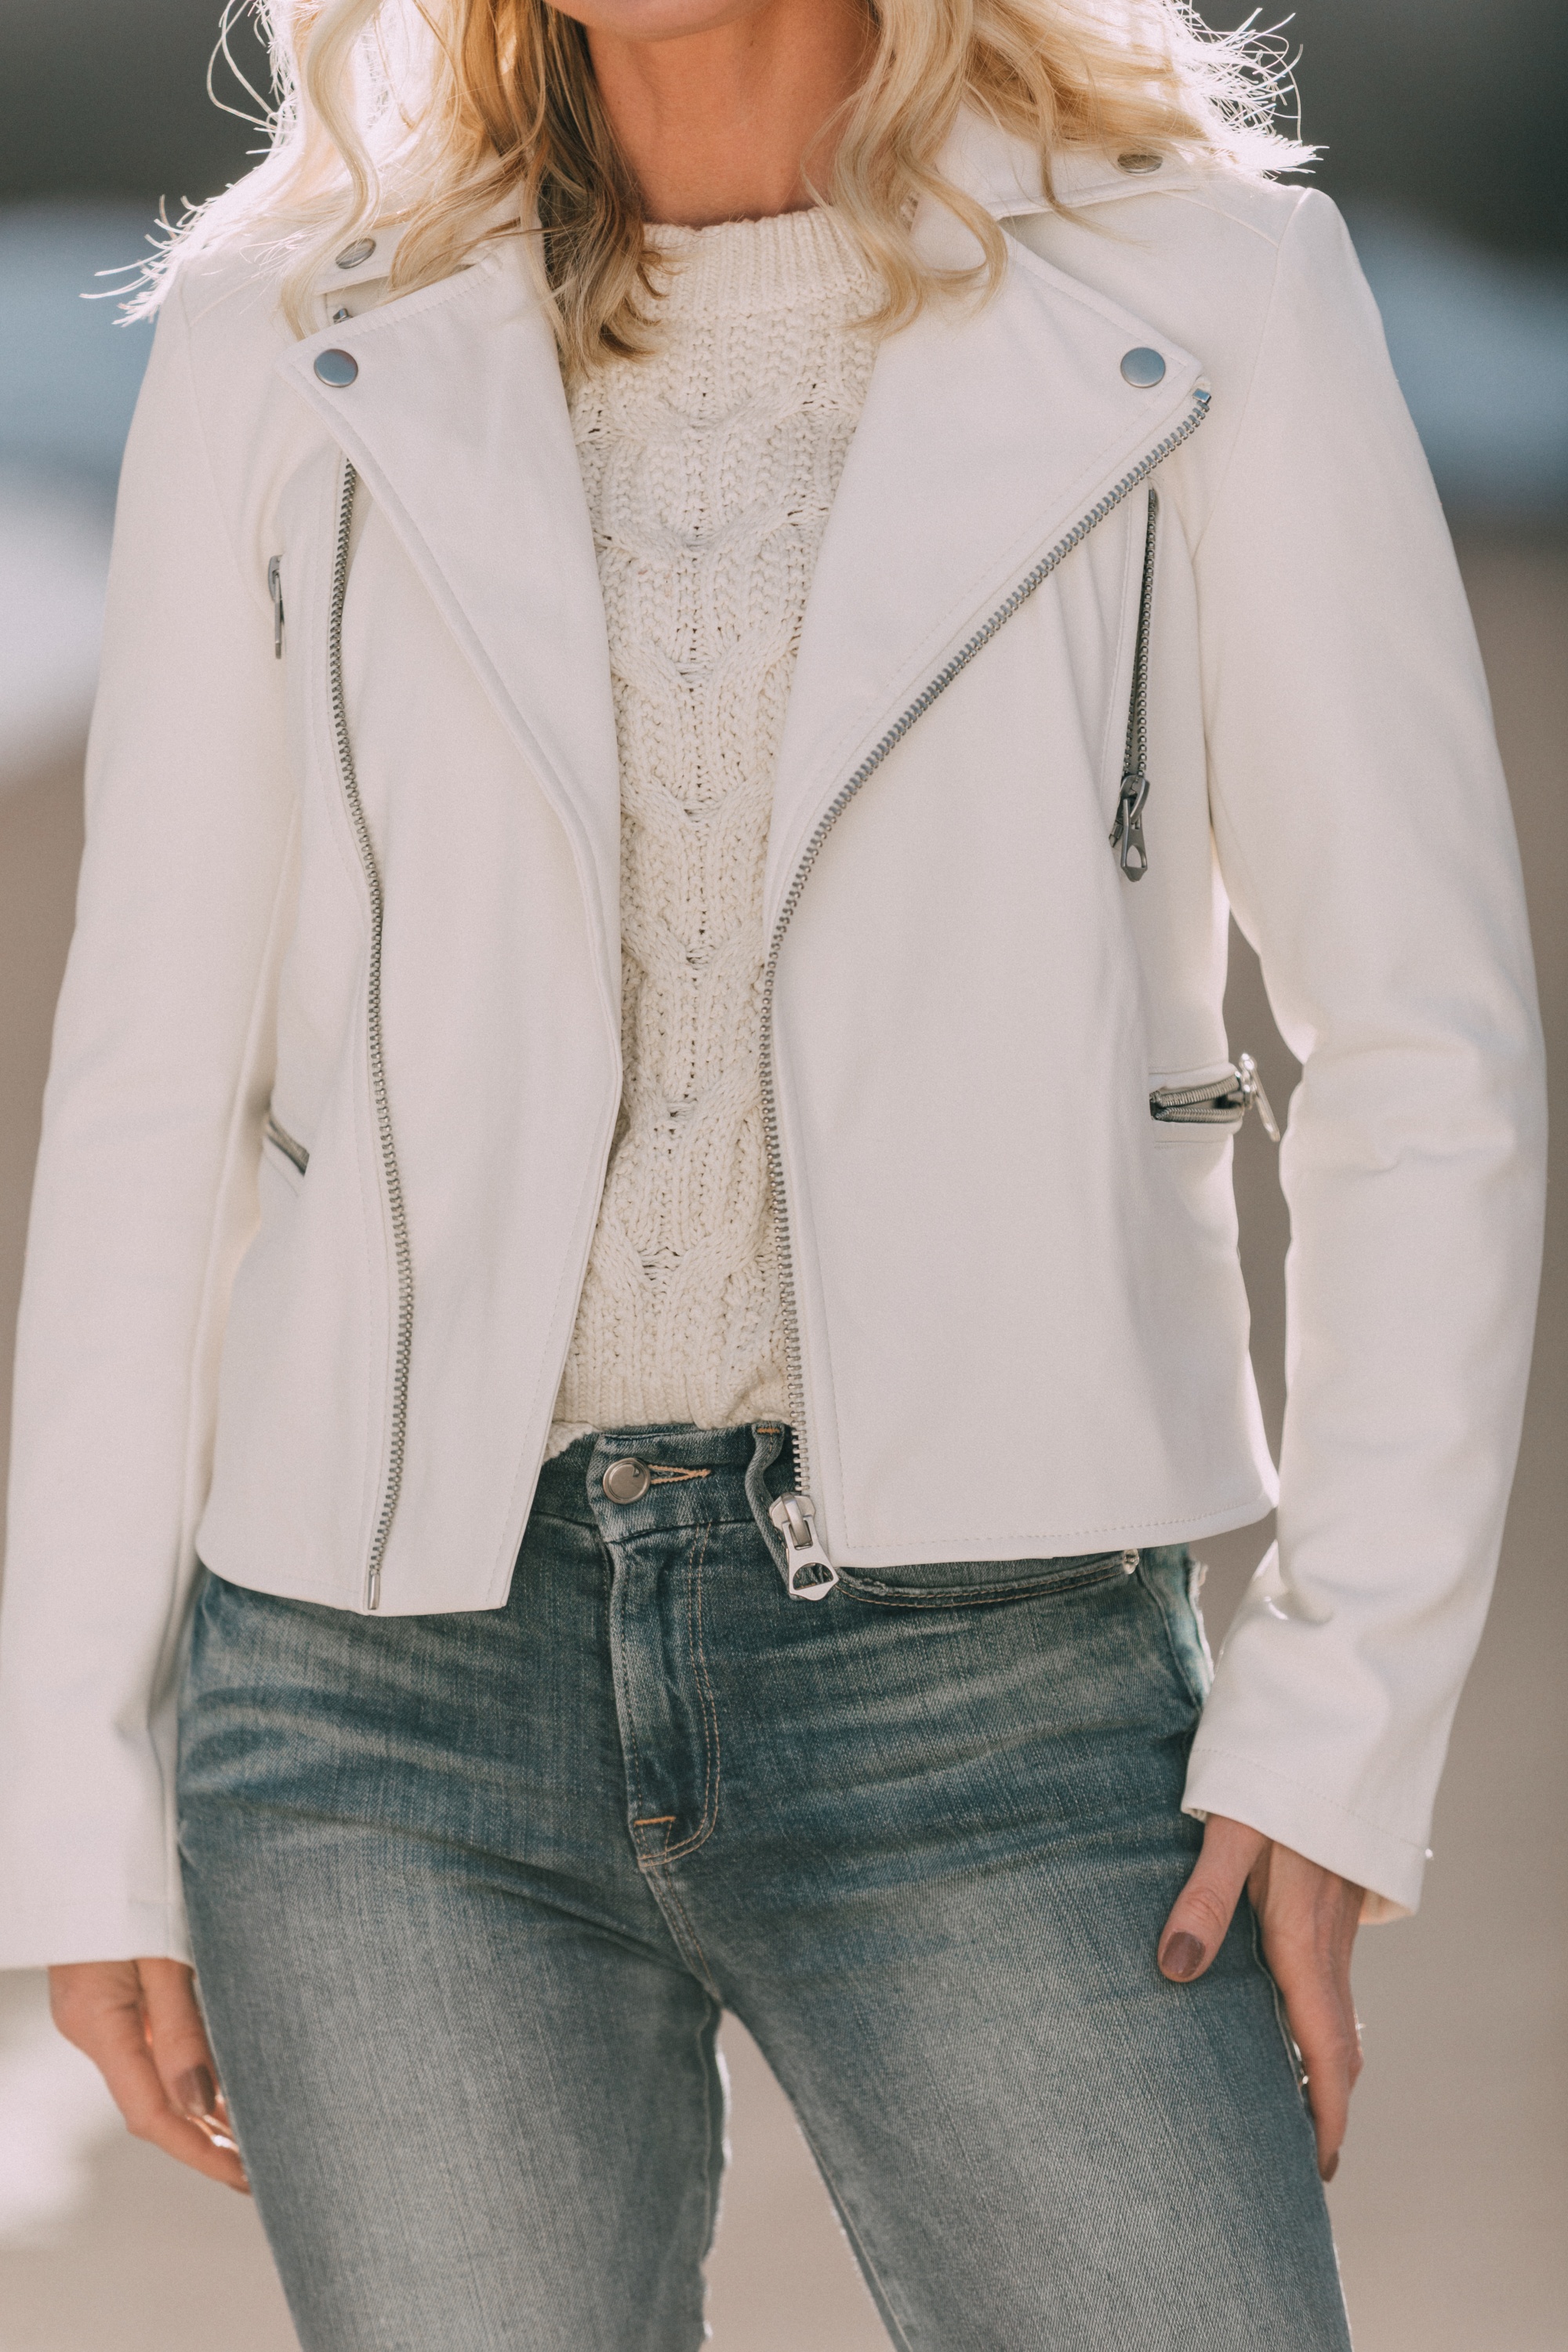 walmart scoop fashion blogger wearing white faux leather moto jacket, white cable knit sweater and medium wash skinny jeans in Telluride, Colorado